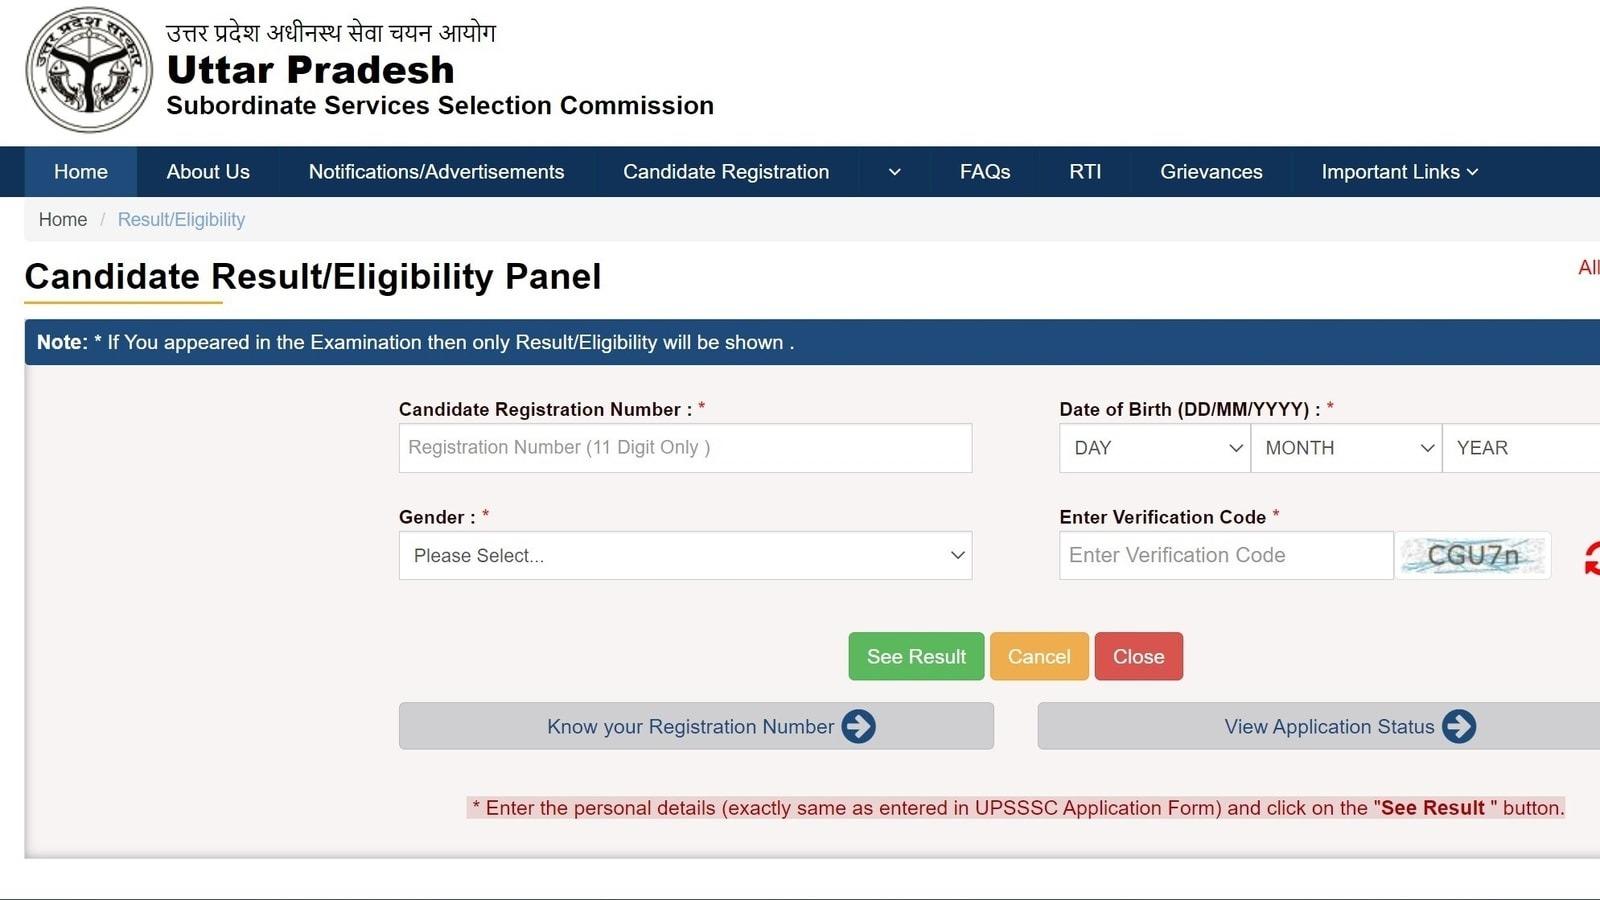 The Uttar Pradesh Subordinate Services Selection Commission (UPSSSC) has announced the UPSSSC Lekhpal Result 2023, marking the declaration of the scores for the recent examination. Candidates who appeared for the exam can now access their scorecards on the official UPSSSC website at upsssc.gov.in.   UPSSSC Lekhpal Result 2023: Accessing Your Scorecard To view and download your UPSSSC Lekhpal 2023 Result, follow these simple steps:  Step 1: Visit UPSSSC's Official Website Head to upsssc.gov.in, the official website of UPSSSC.  Step 2: Locate the Result Tab Click on the result tab available on the commission’s homepage.  Step 3: Click on the Result Link Select the “Click here to view results” link that appears.  Step 4: Choose the Relevant Exam Link Click on the “Click here to View Rajasva Lekhpal Mains Examination (PET- 2021)/02” link.  Step 5: Enter Your Credentials Provide your login details such as Registration Number and Date of Birth.  Step 6: Access Your Result The UPSSSC Lekhpal 2023 Result will be displayed on the screen.  Step 7: Download and Save Download the result and consider printing a copy for future reference.  Exam Details and Vacancies A total of 7897 candidates have successfully cleared the examination out of the earlier notified 8085 vacancies. The vacancies were distributed among various categories as follows:  Category	Vacancies Unreserved	3271 OBC	2174 SC	1690 EWS	798 ST	152 Checking Your Result Details Once you’ve downloaded your UPSSSC Lekhpal 2023 Result, ensure to verify all the details mentioned in the scorecard, including your personal information, examination details, marks, and percentage achieved. Should there be any discrepancies, it is vital to report them promptly to the authorities for necessary rectification.  UPSSSC Lekhpal Result 2023: Cut-off Criteria The cut-off percentages for different categories are as follows:  Unreserved (General, EWS, and OBC): 75.75% SC Category: 73.75% ST Category: 66.50% The written examination comprised sections covering General Hindi, Mathematics, General Knowledge, and Village Society and Development, each carrying 25 marks. Remember, there is a penalty of one-fourth of a mark for each incorrect answer.